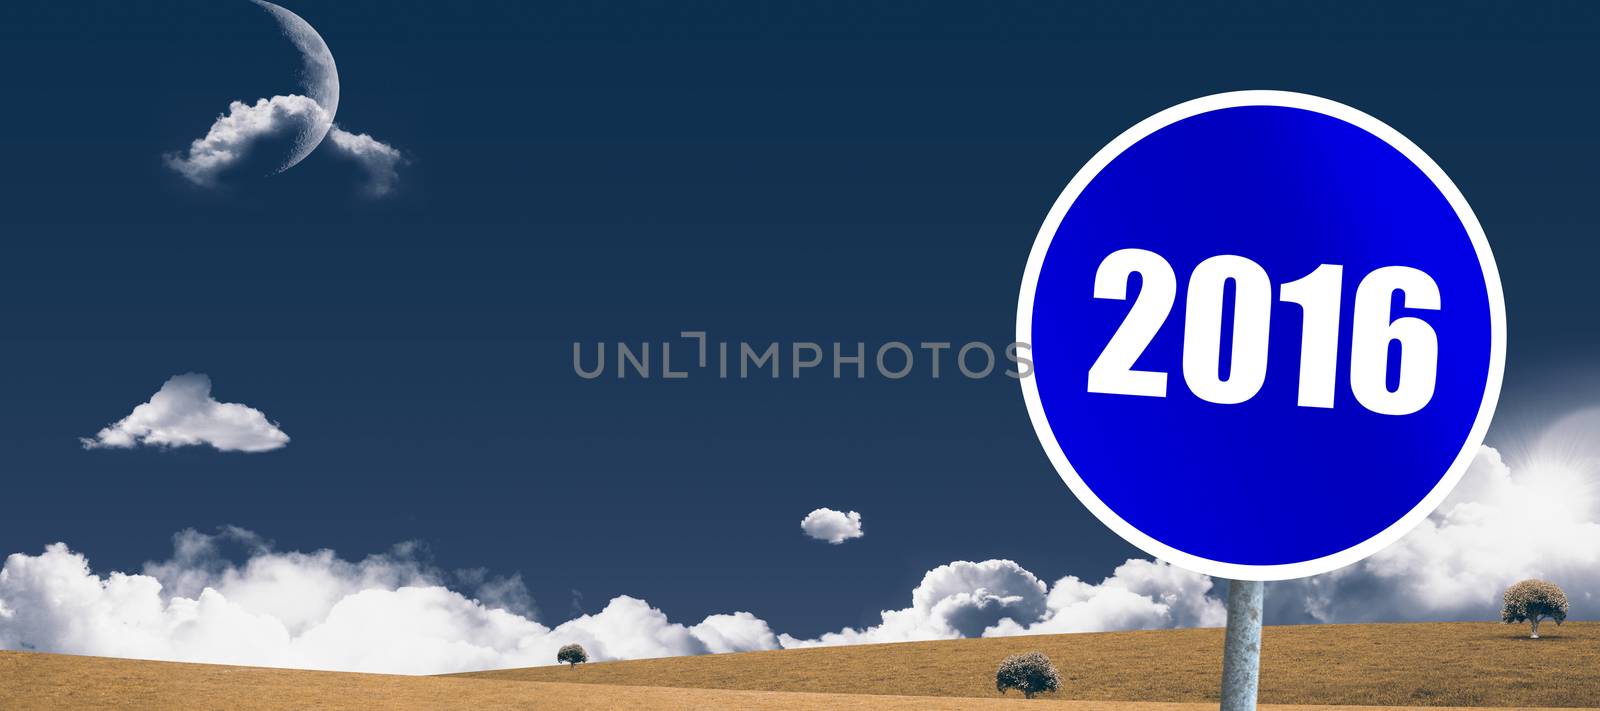 Composite image of blue sign by Wavebreakmedia